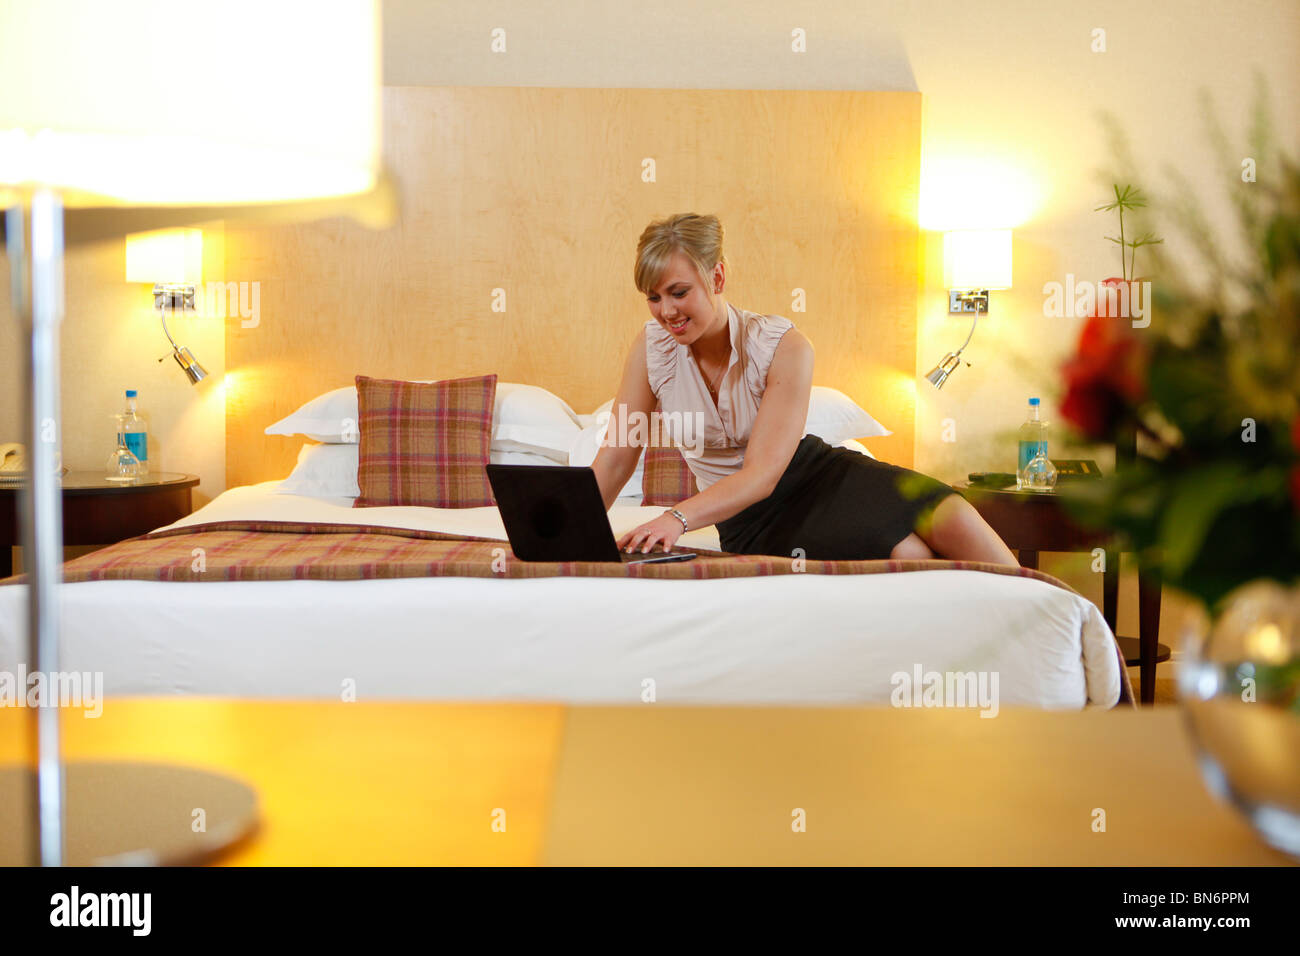 Woman in hotel suite, sat on a bed. Stock Photo